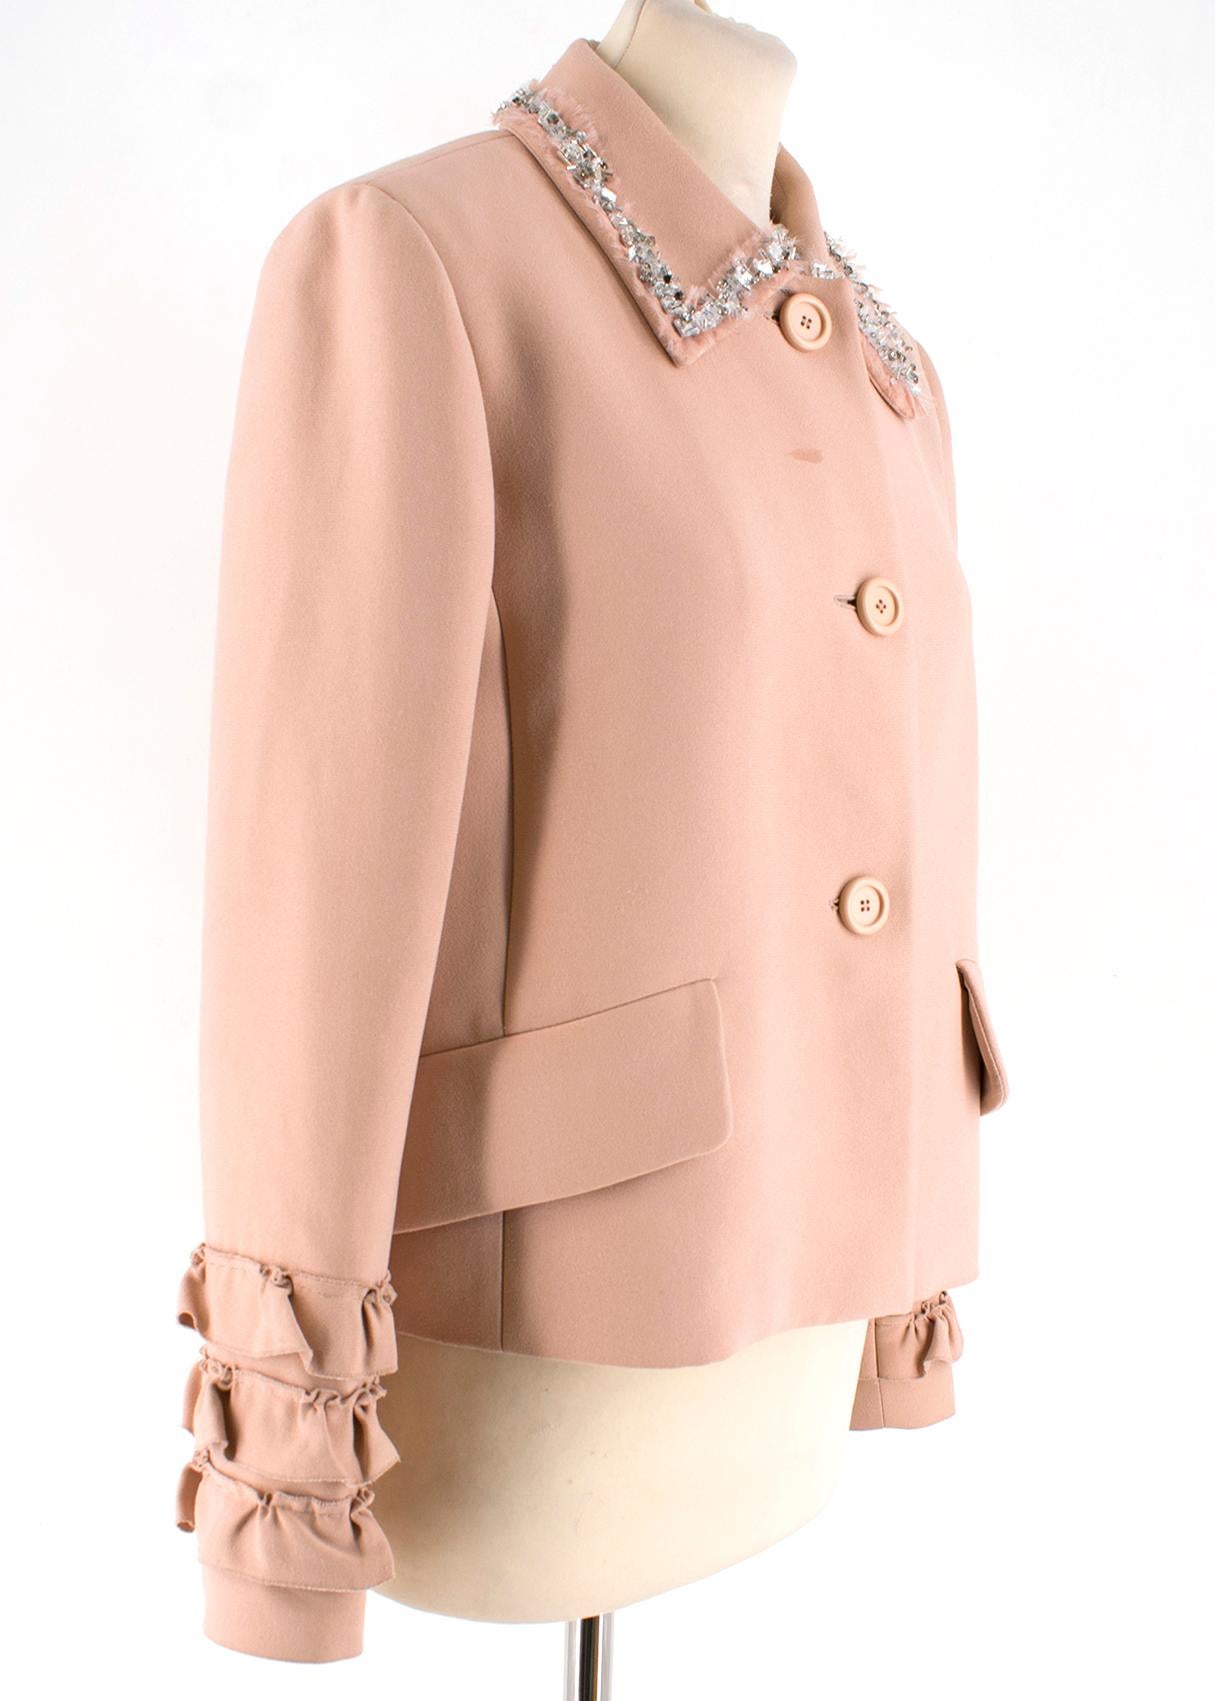 Miu Miu blush pink blazer. Featuring ruffle detailing on the cuffs and silver coloured embroidery around the collar. Front button closure with three blush pink buttons. Pockets still sewn shut. Dry clean only. Made is Italy. 

Please note, these